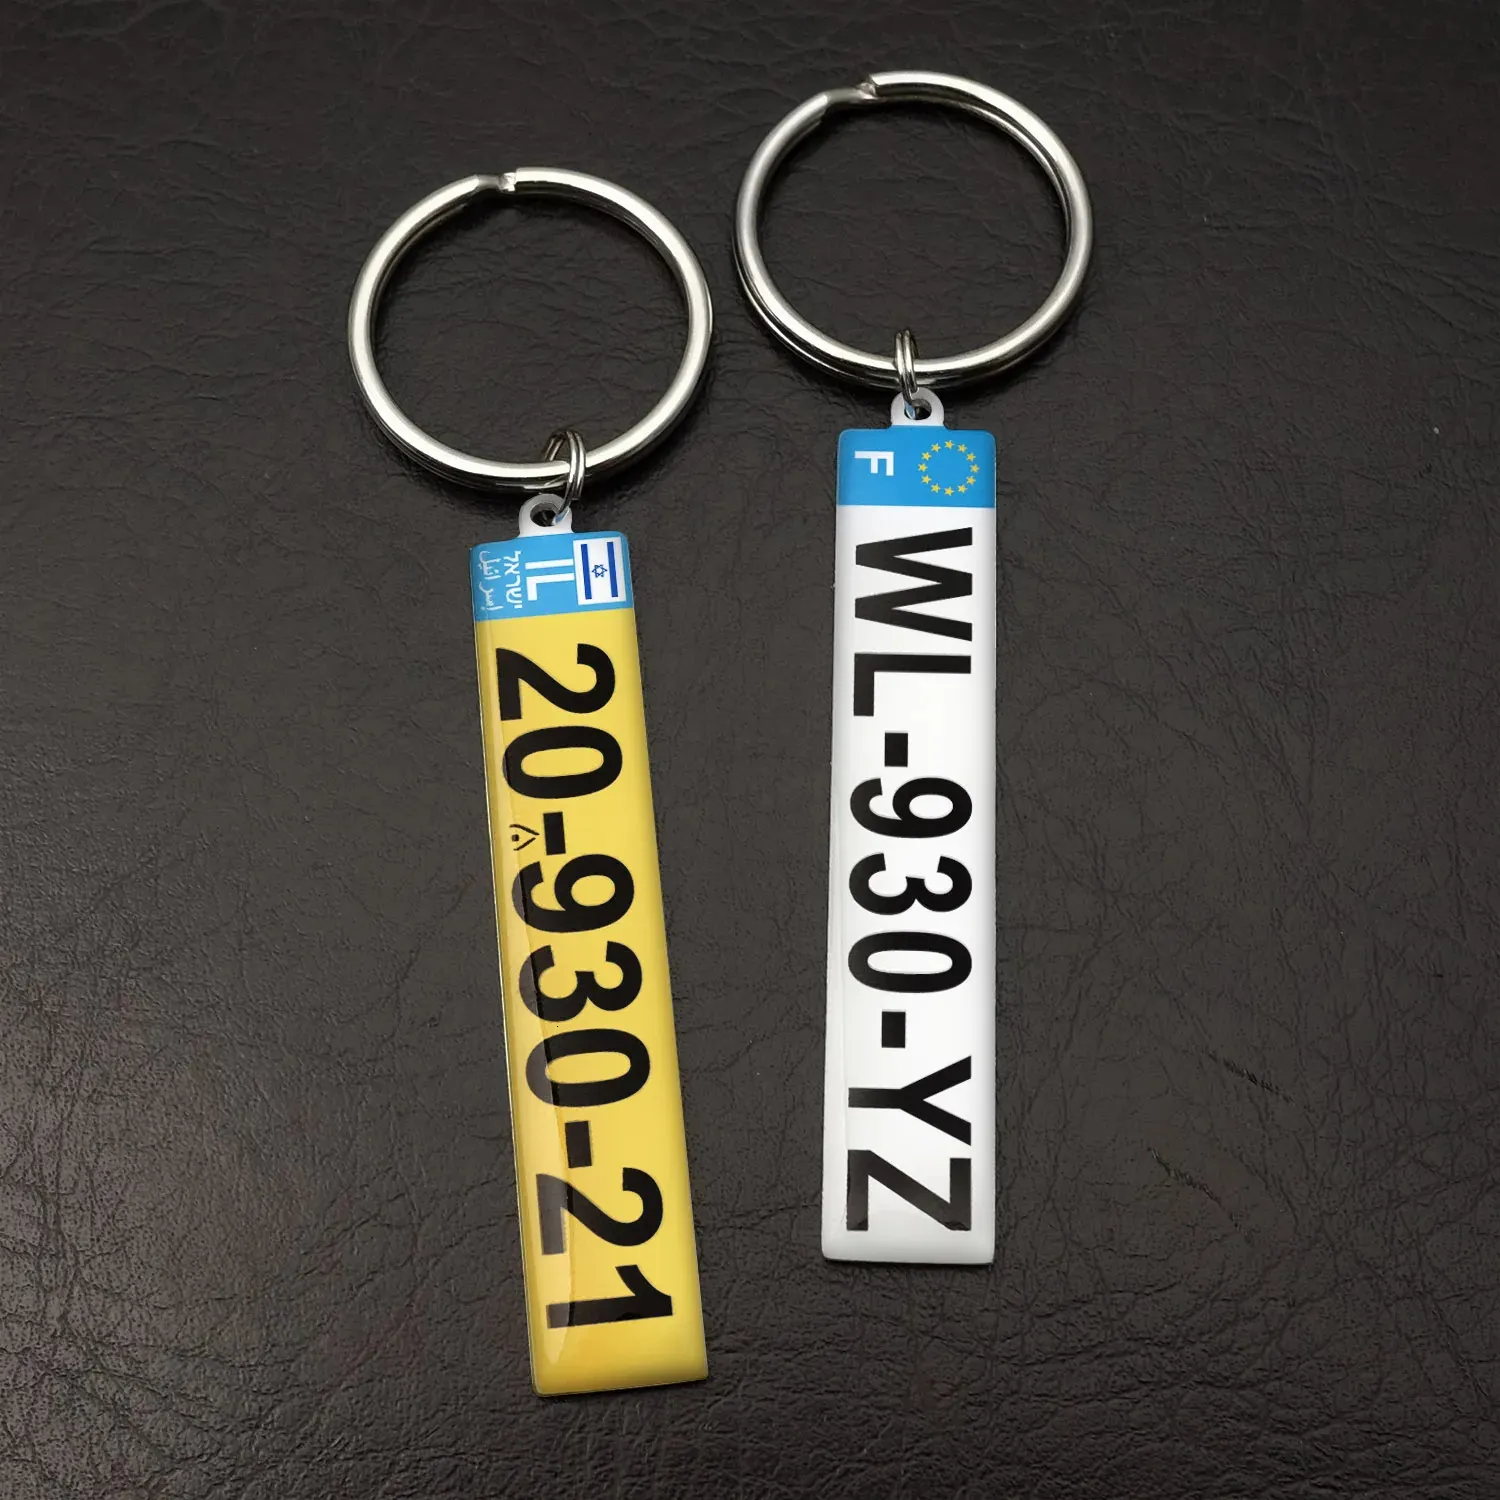 Custom Number Plate Keychain Car Number Plate Keychain Car Number Key Ring Personalized Gift for Him Anti-lost Gift for Driver 240110